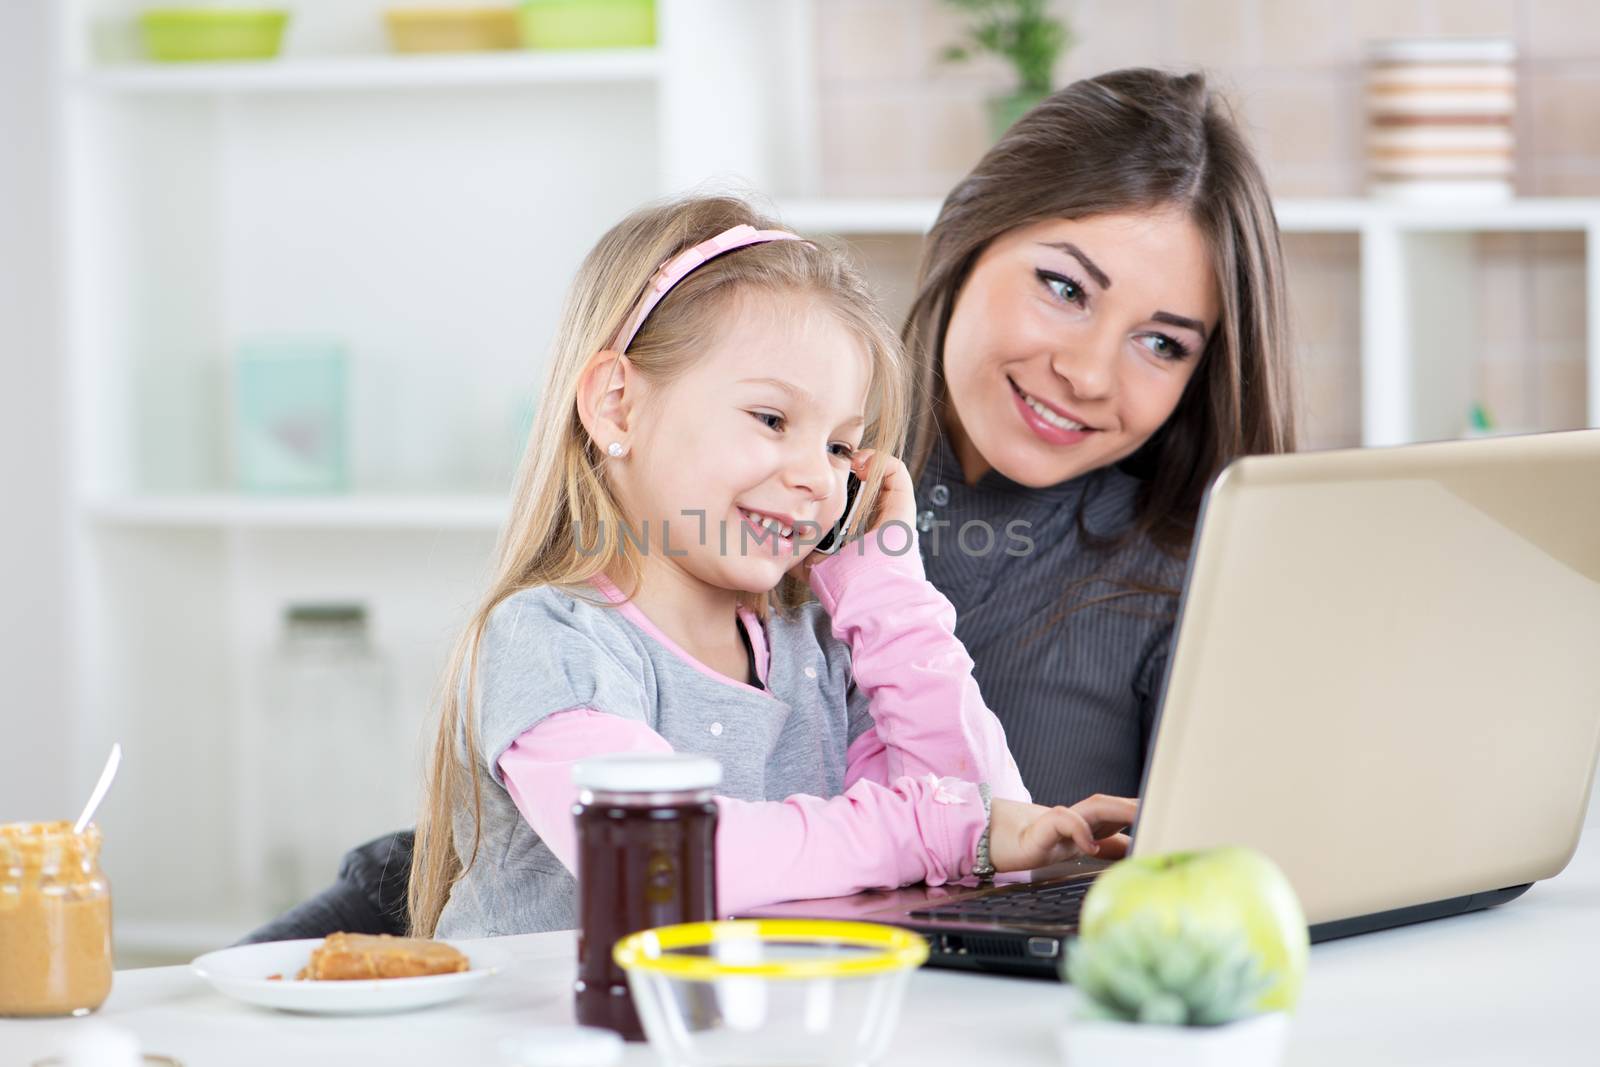 Mom and daughter having fun in the morning during breakfast. Cute Little girl imitates mom to use laptop and telephone.